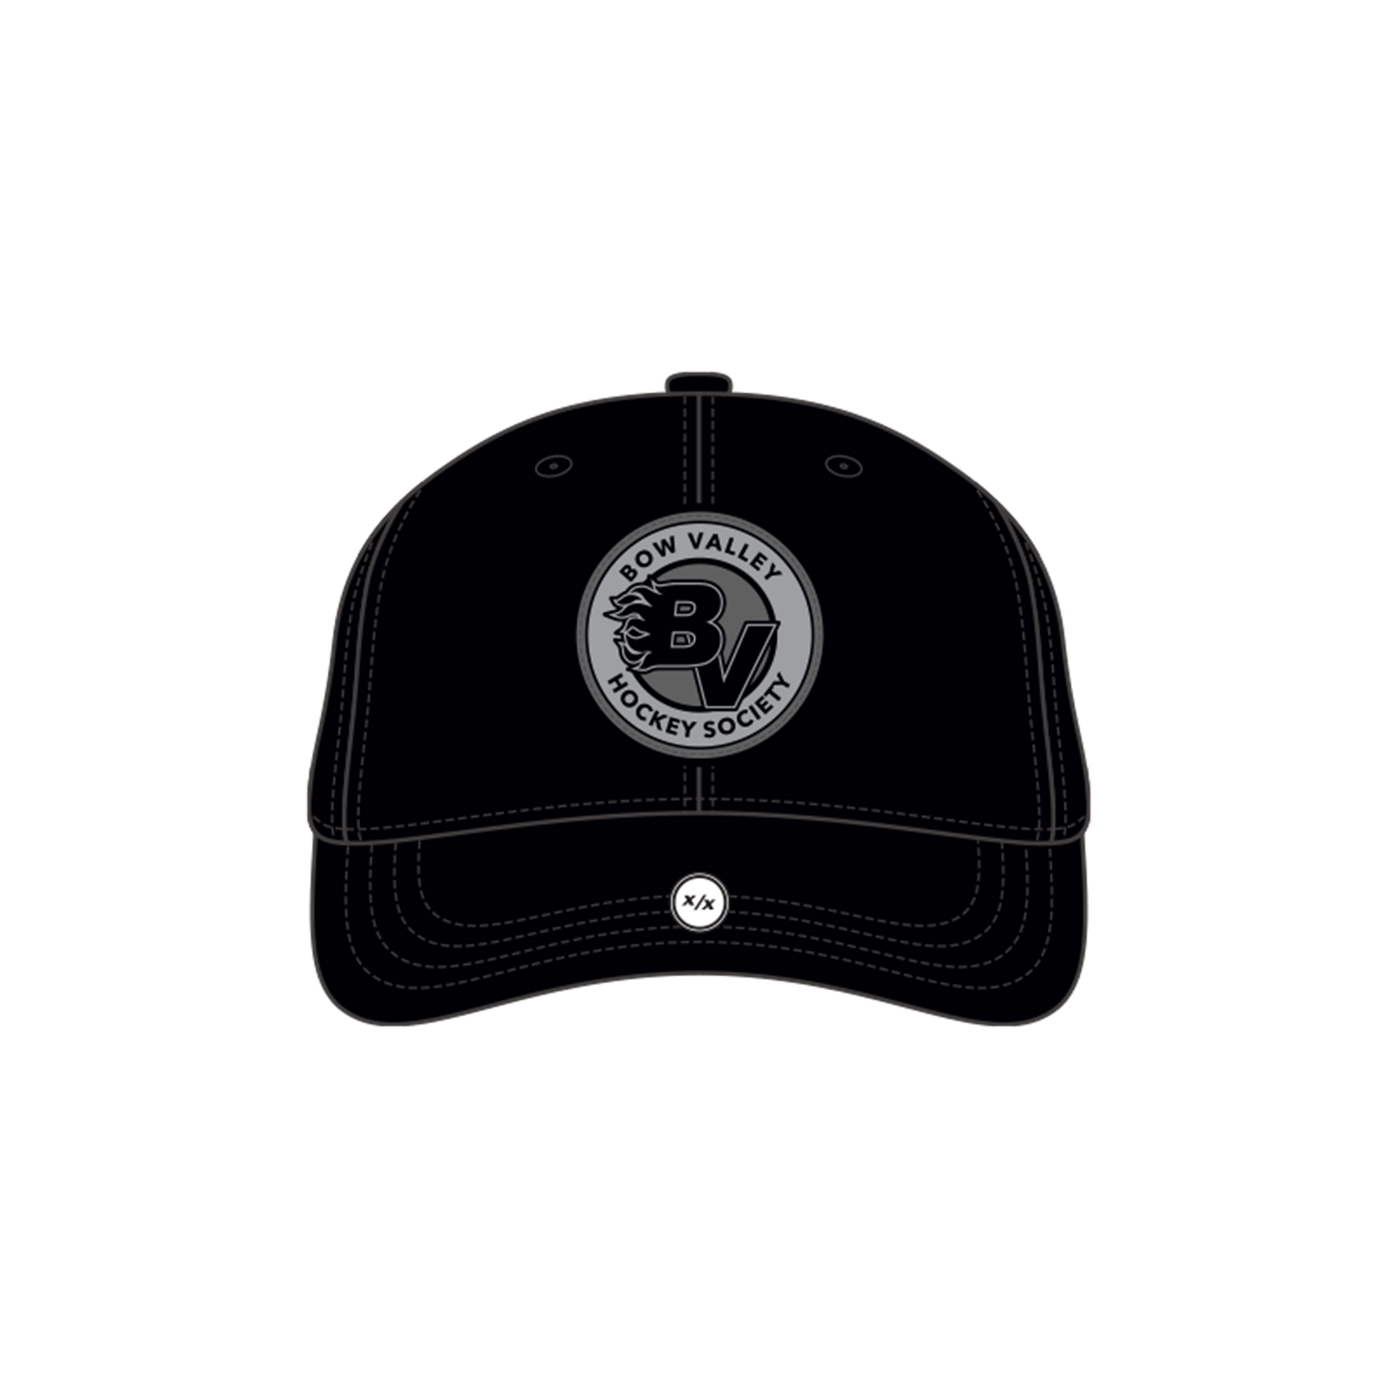 Bow Valley Black Fitted Cap